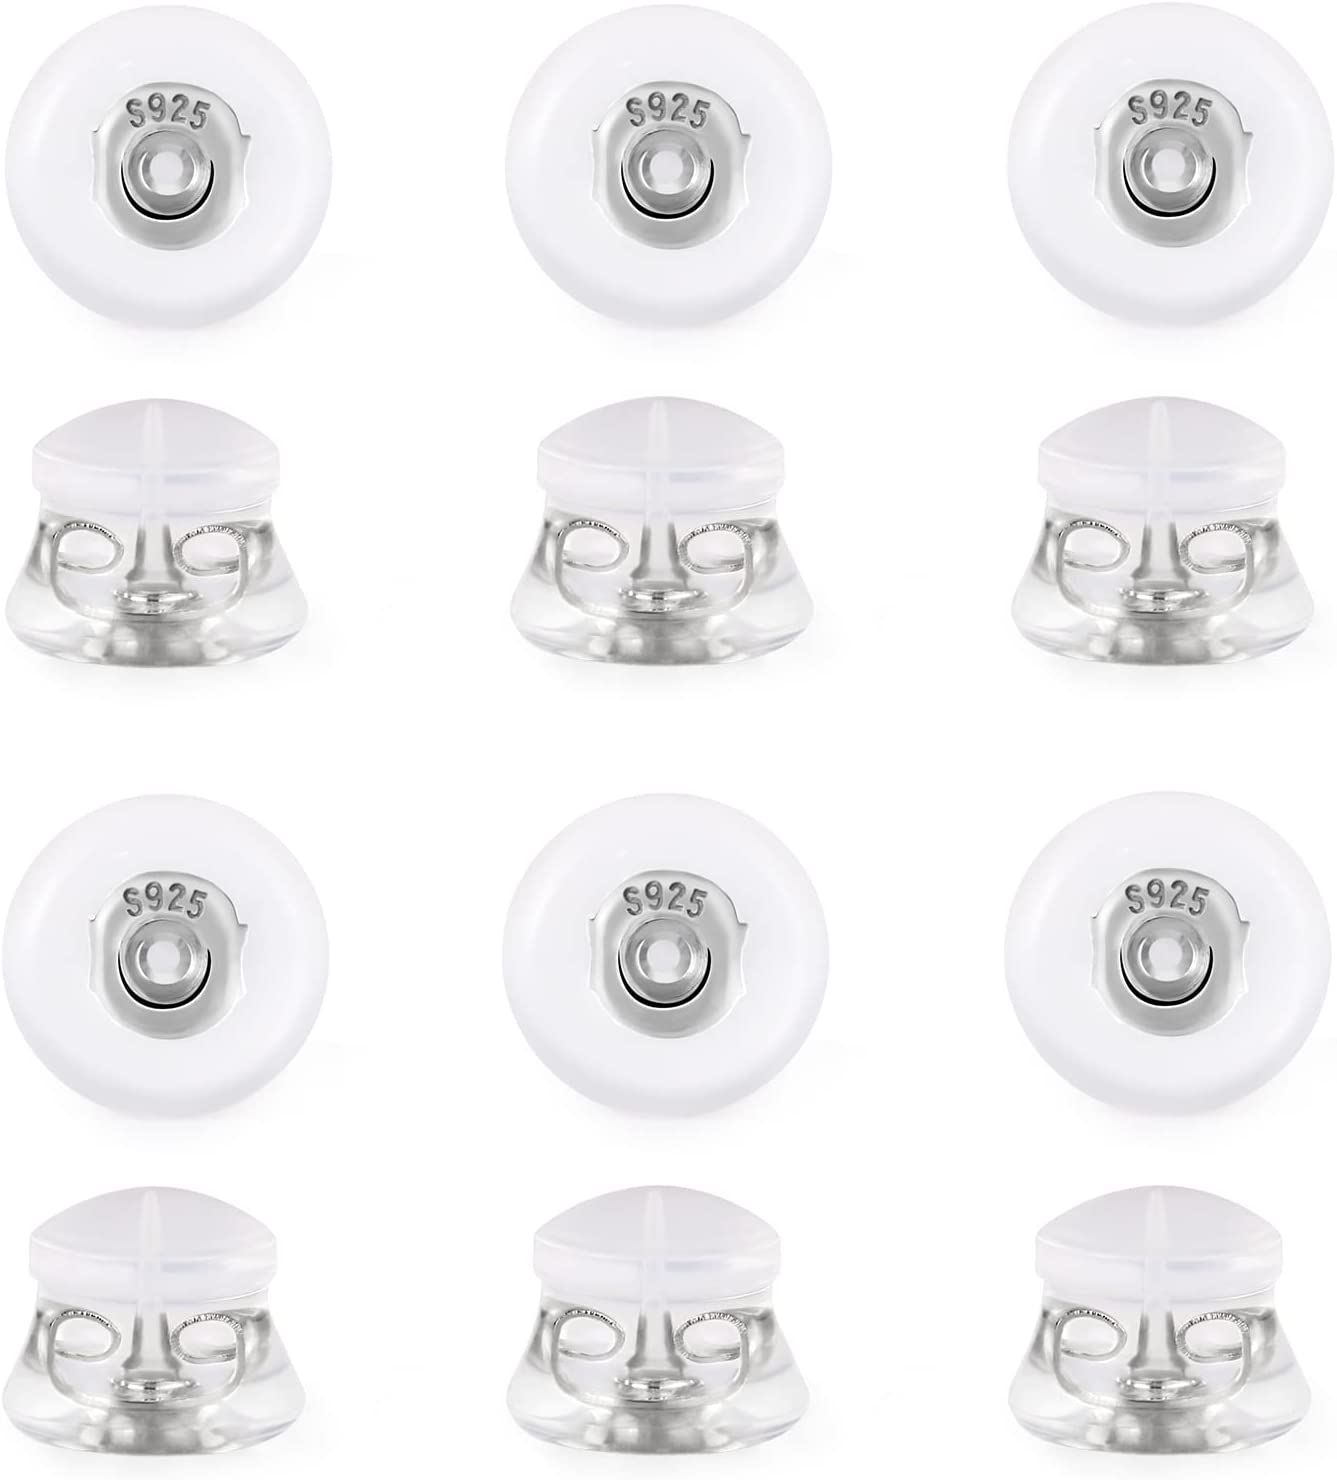 Earring Backs Rubber for Studs-925 Silver Silicone Earrings Back